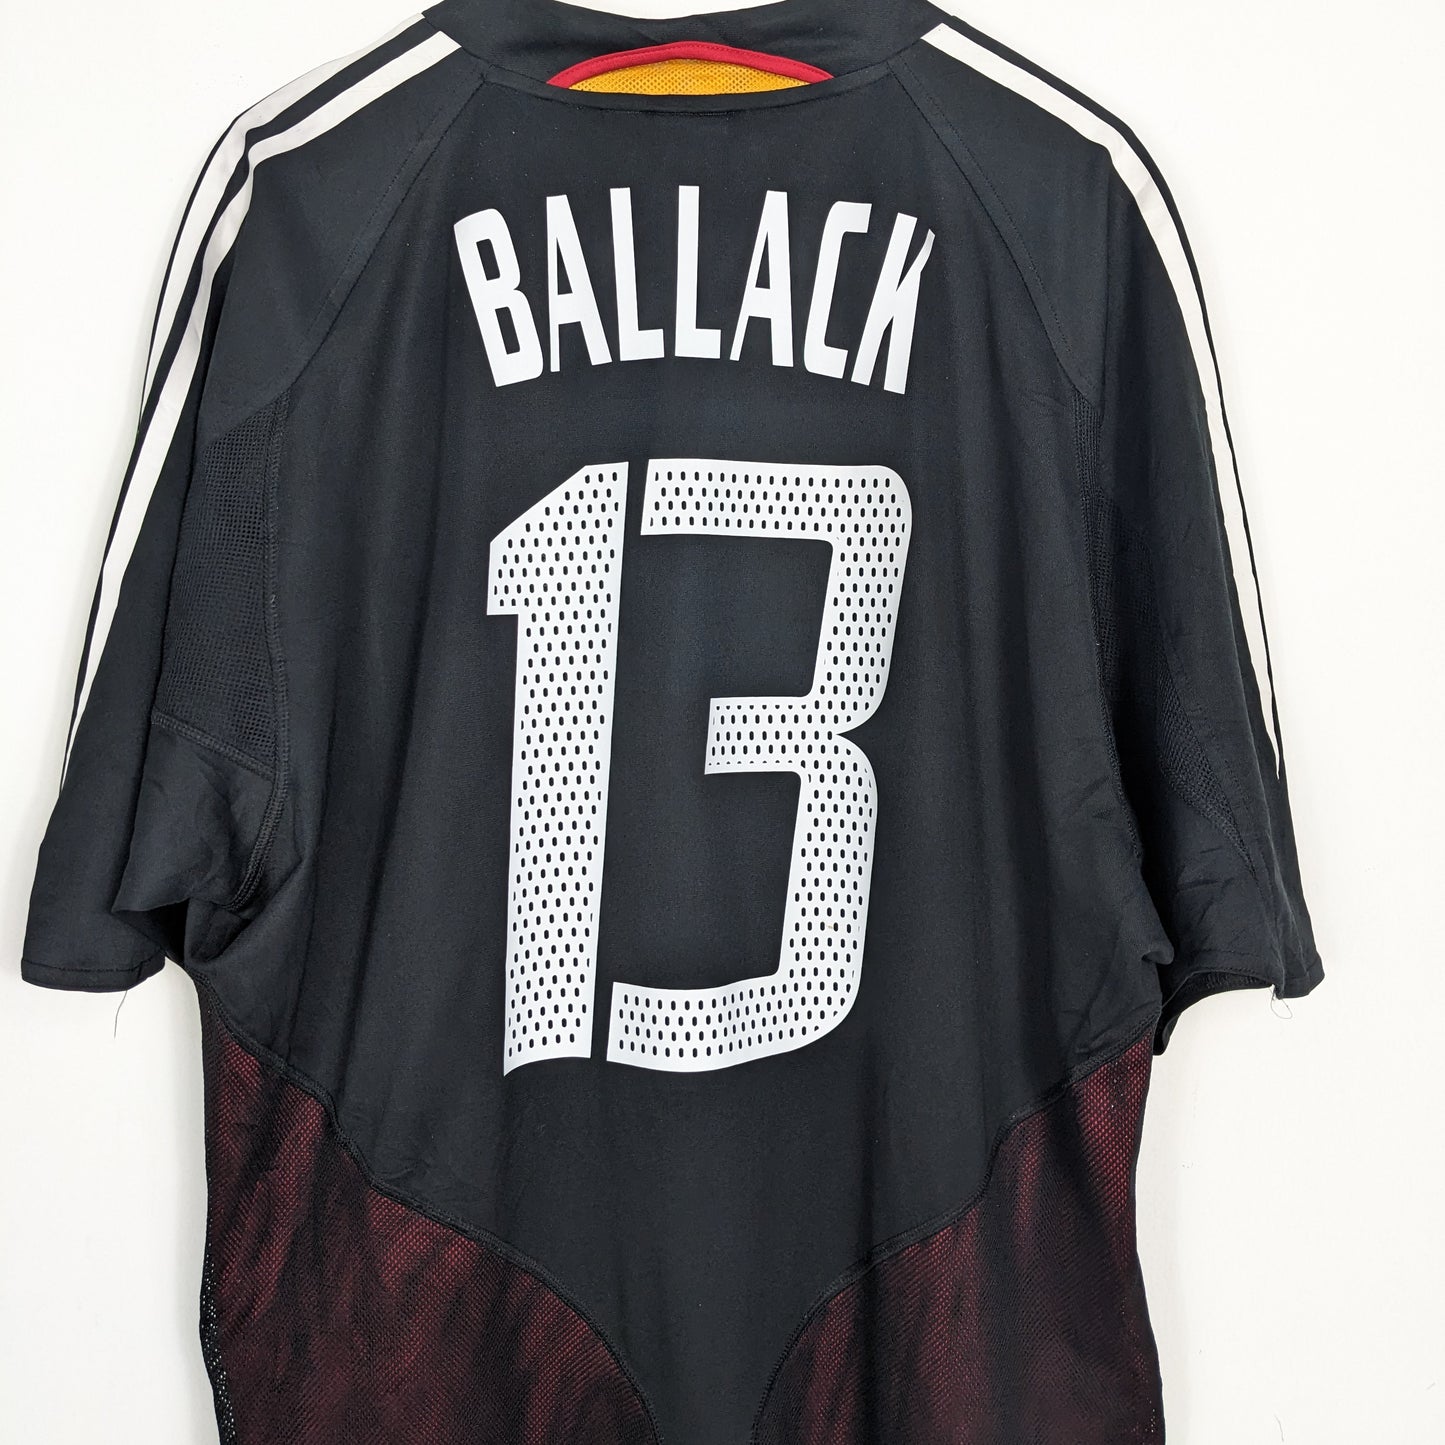 Authentic Germany 2003 Away - Ballack #13 Size XL (With shorts)